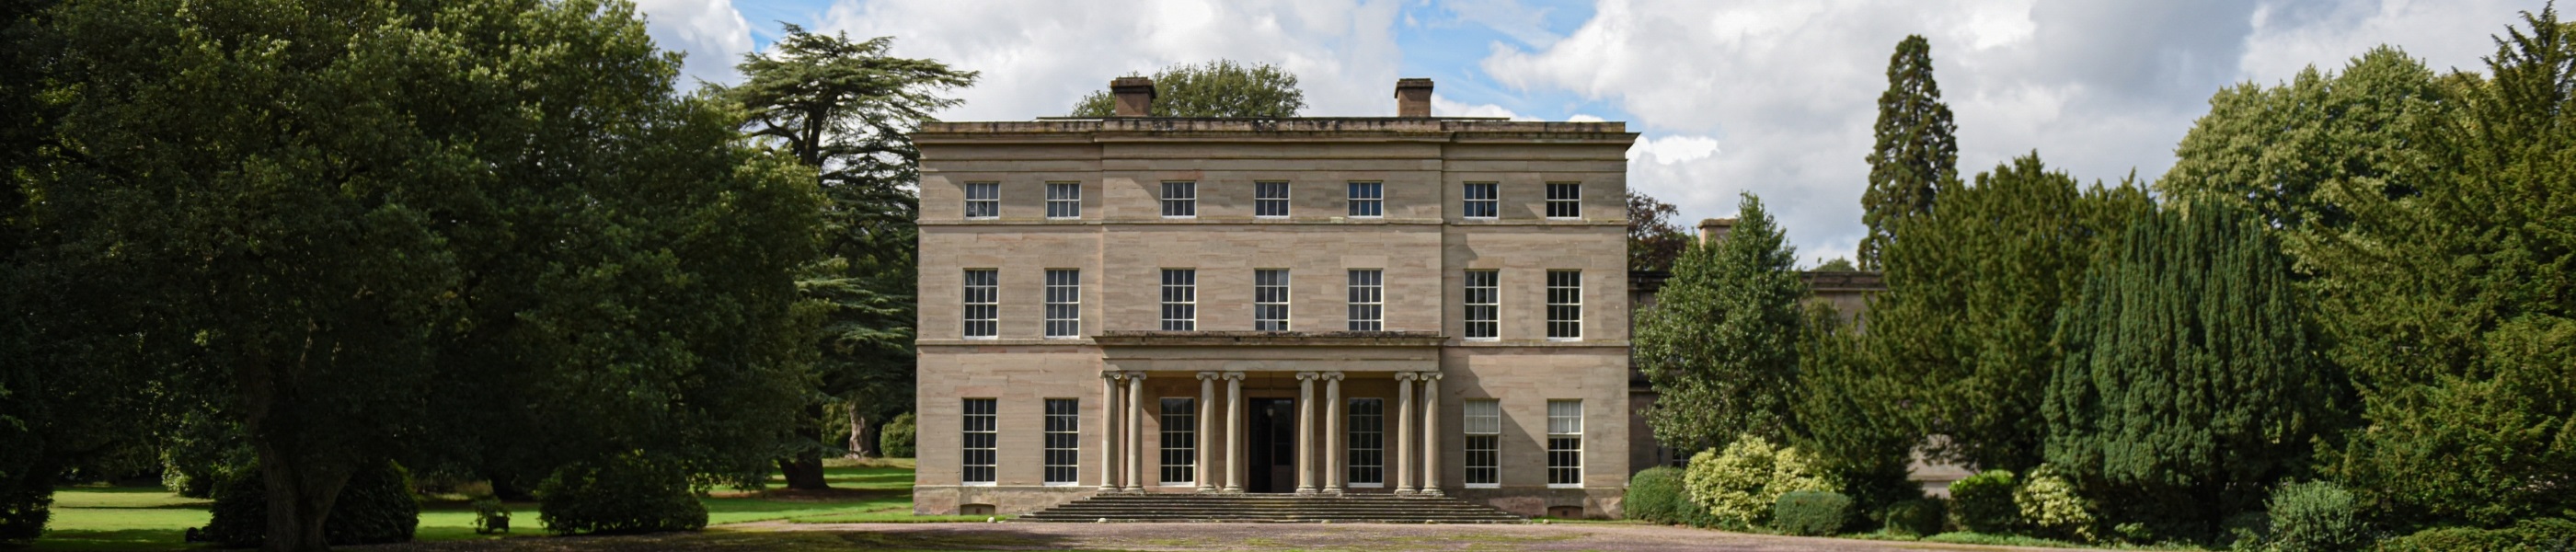 THE HOUSE OF SANDYS: OMBERSLEY COURT